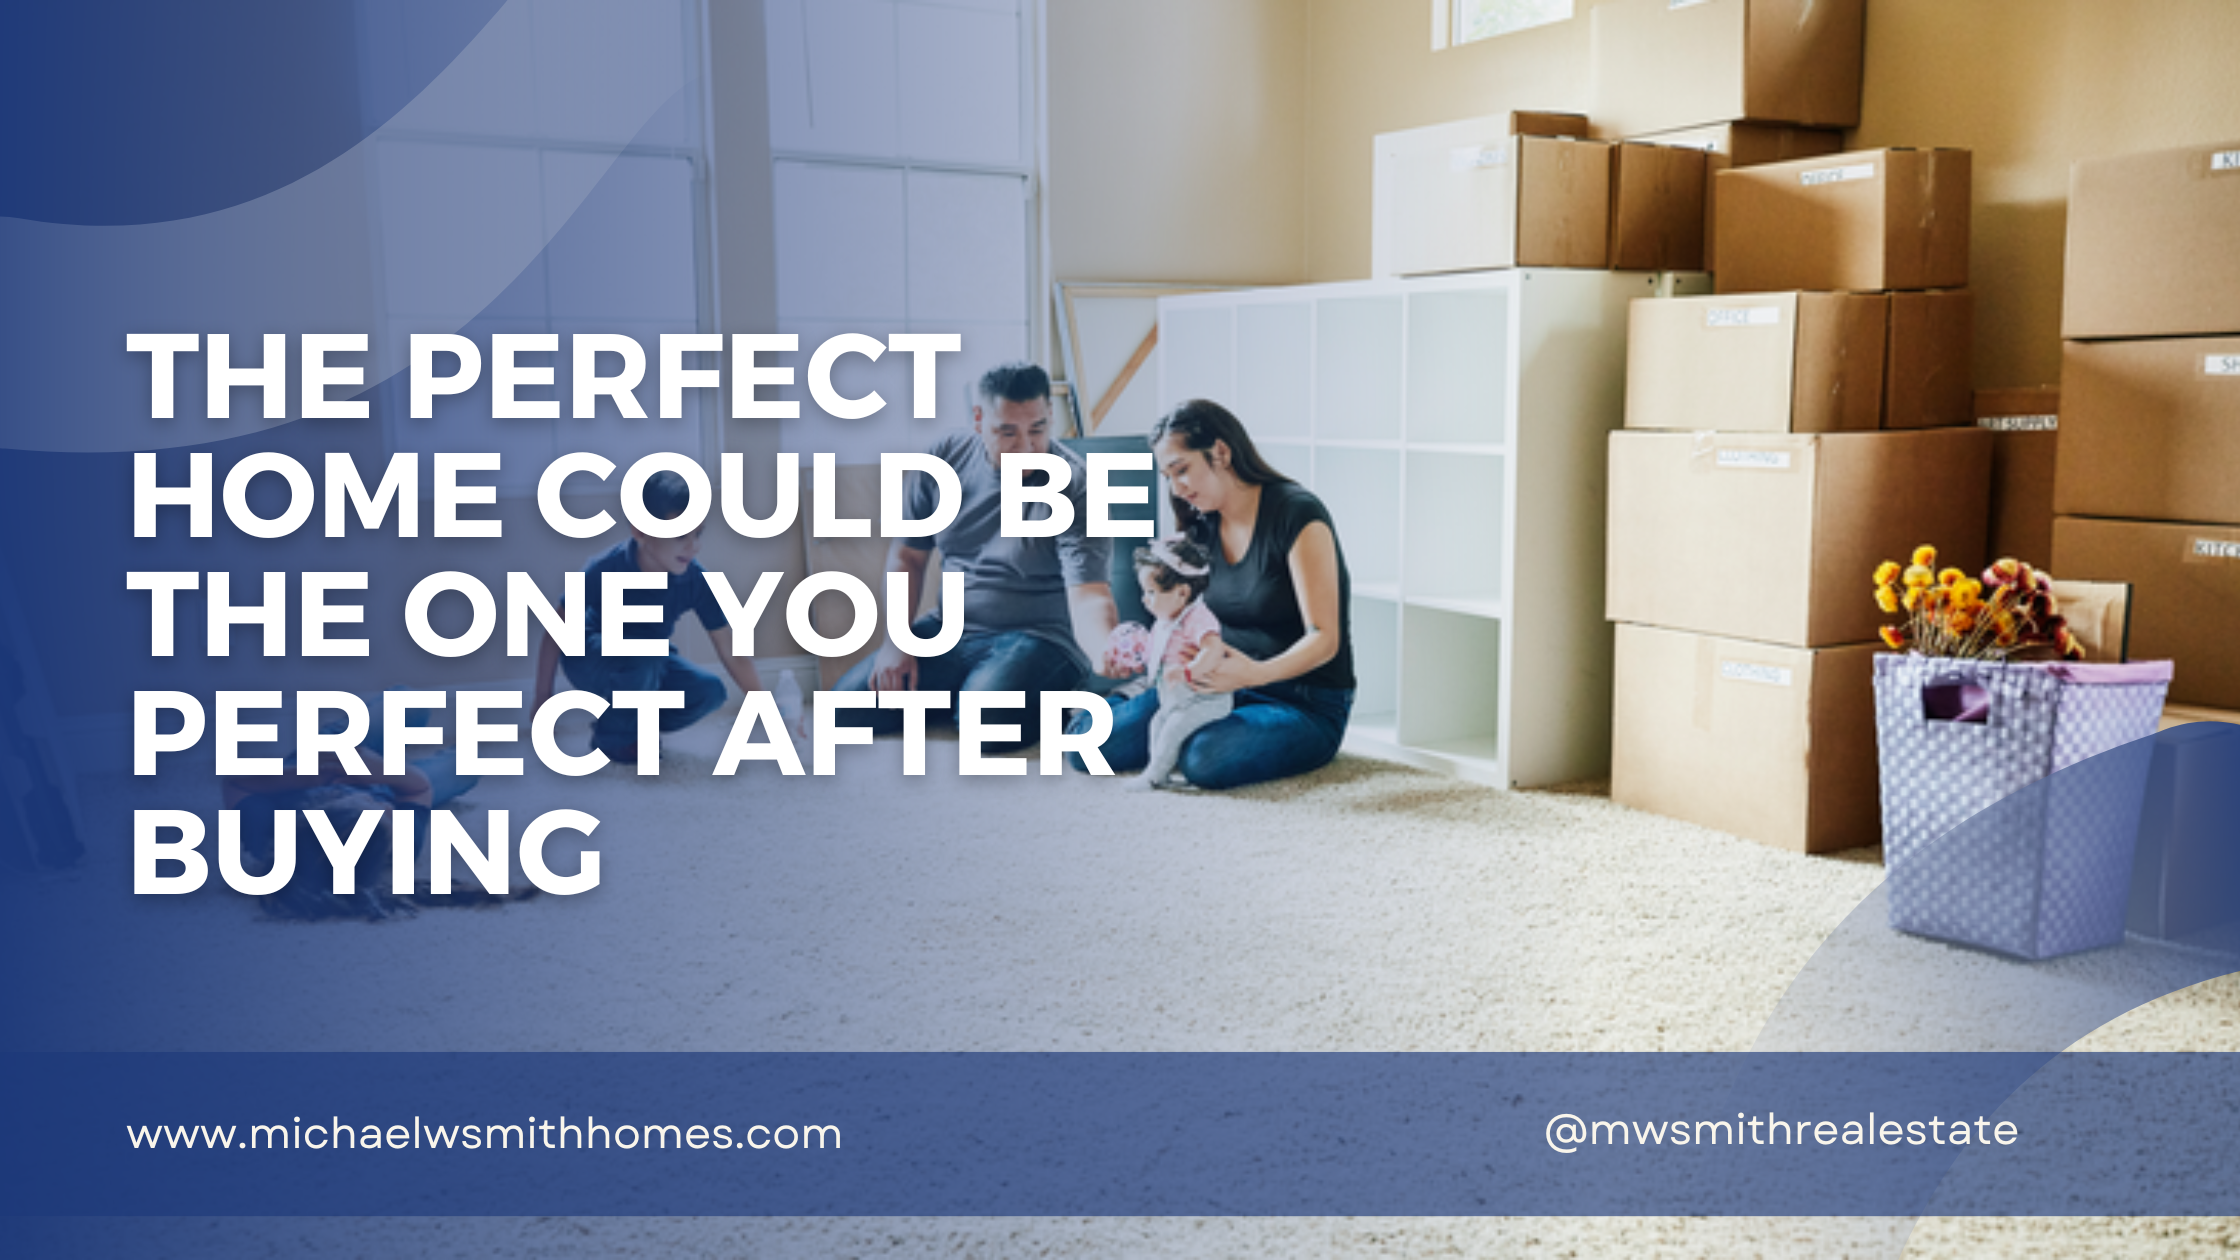 The Perfect Home Could Be the One You Perfect After Buying